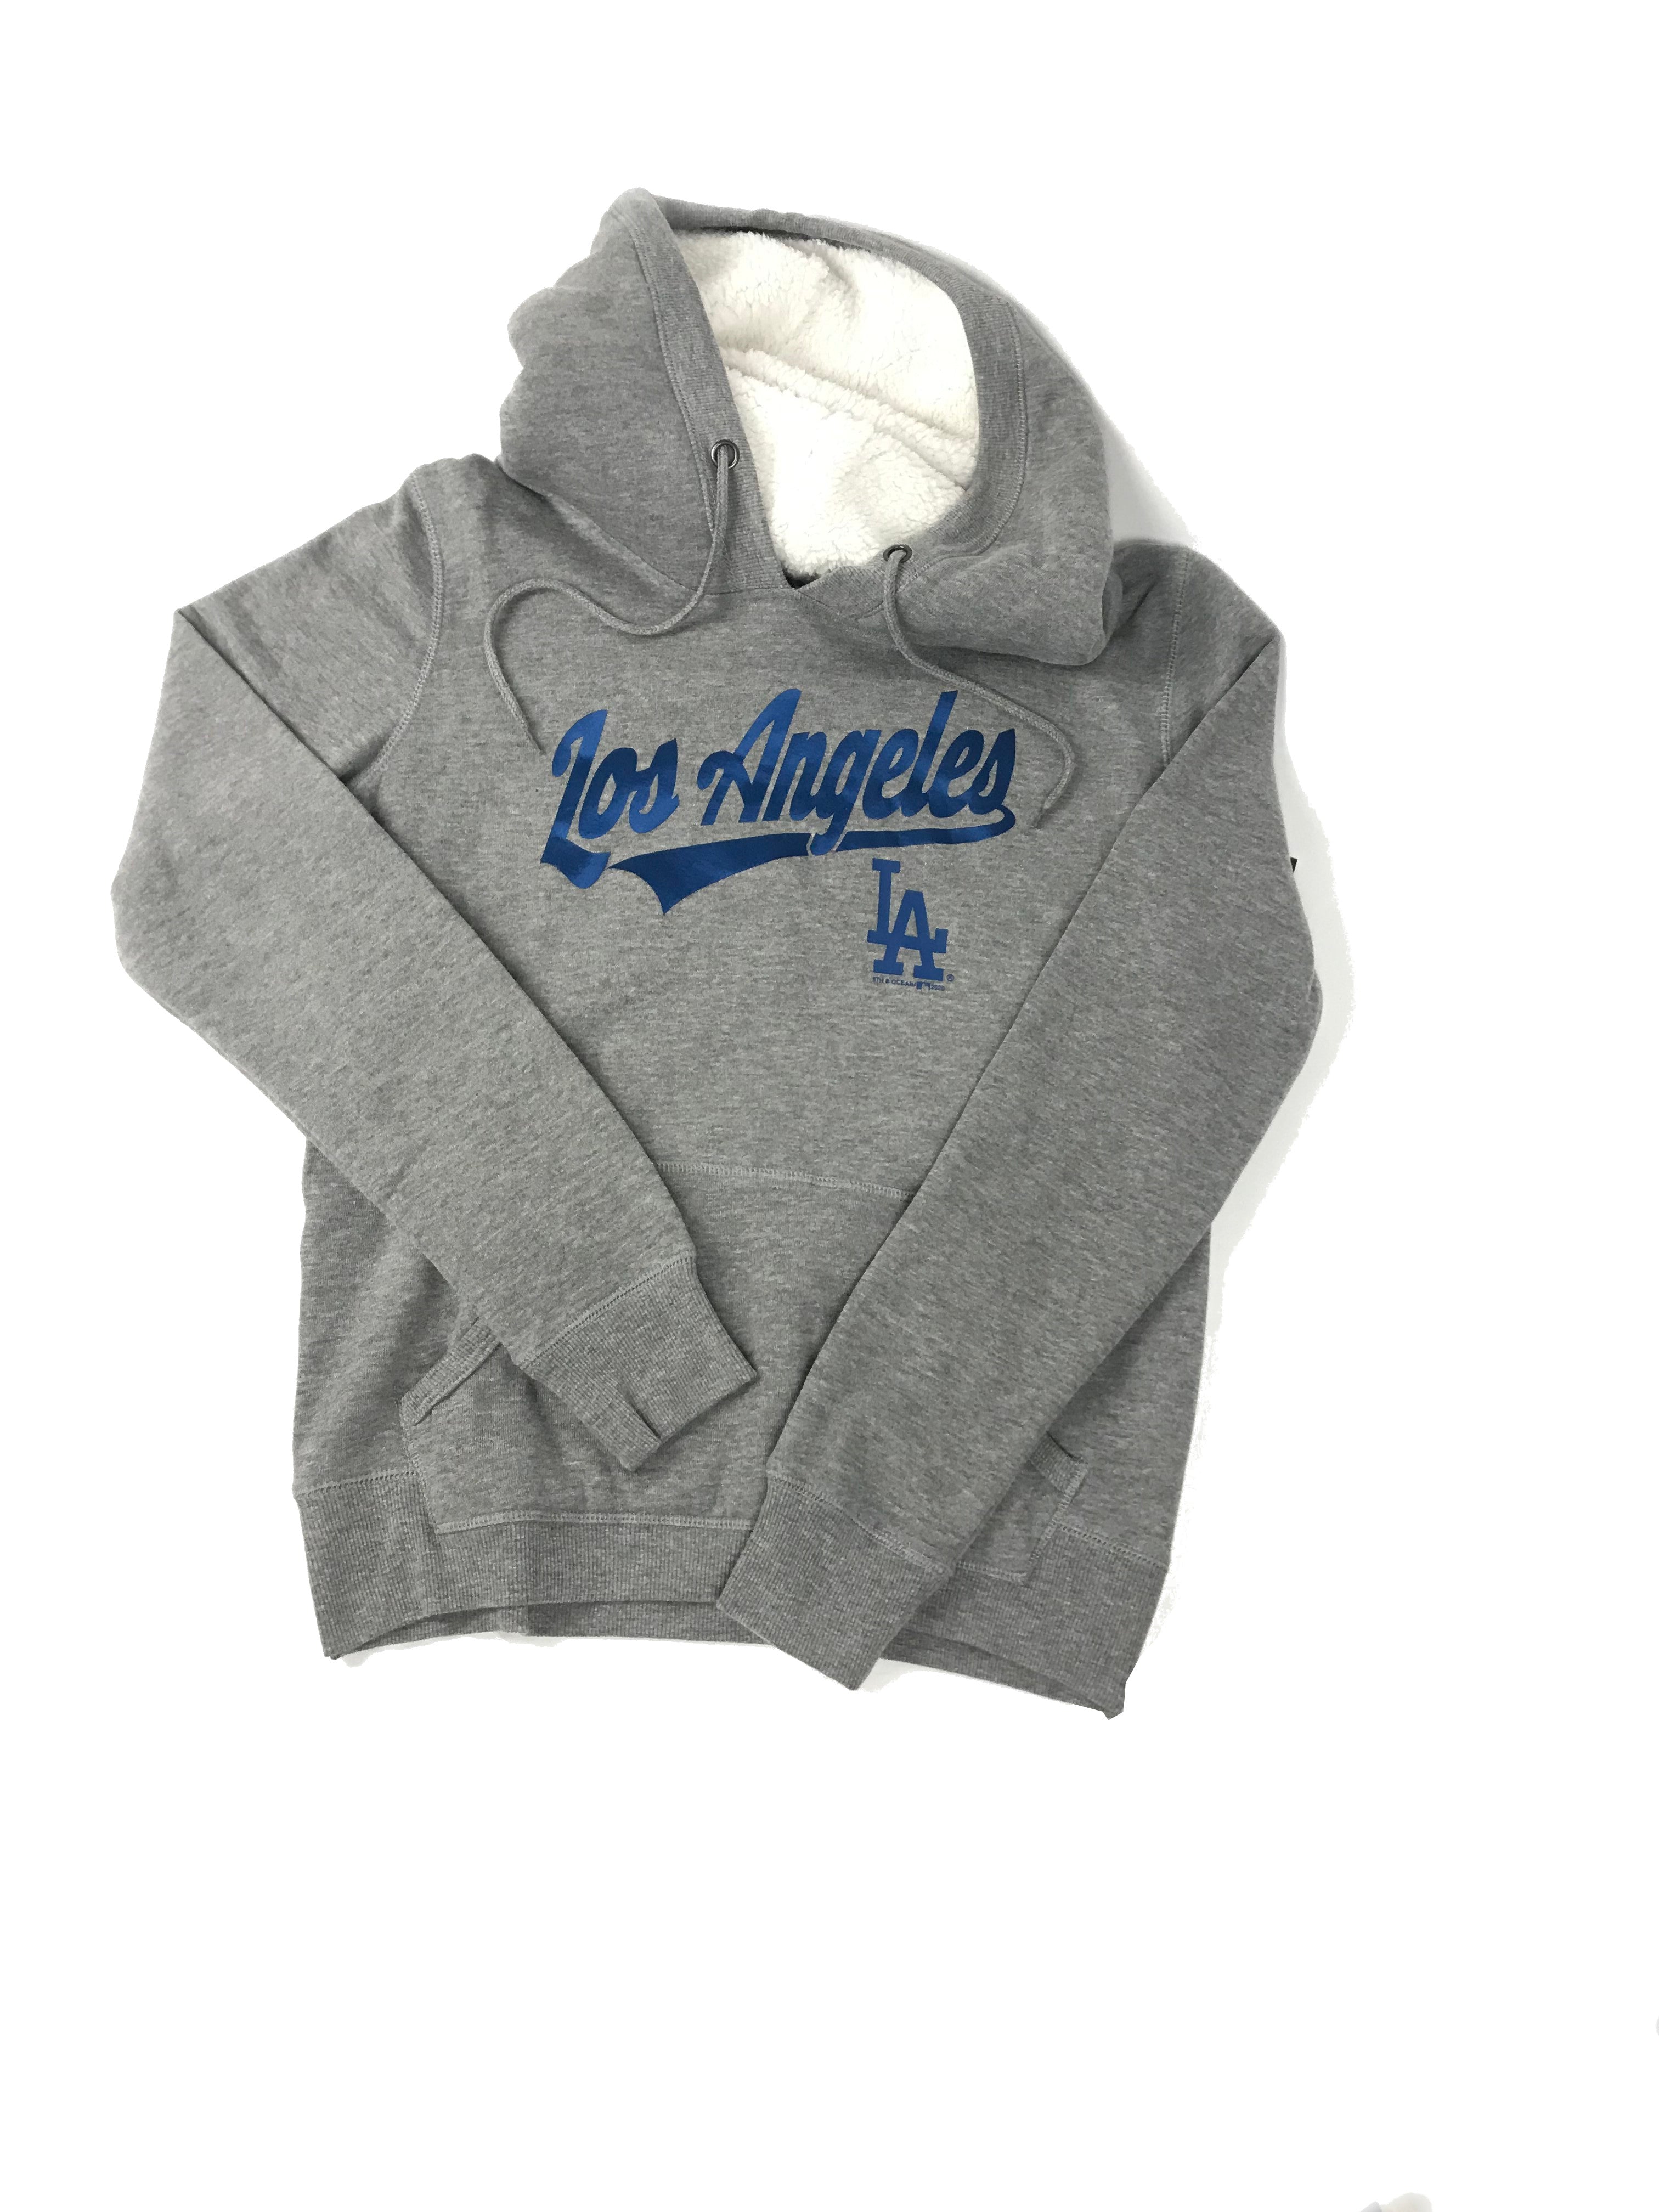 Los Angeles Dodgers Women's Foil City Name Hoodie Sweater 20 Gray / M